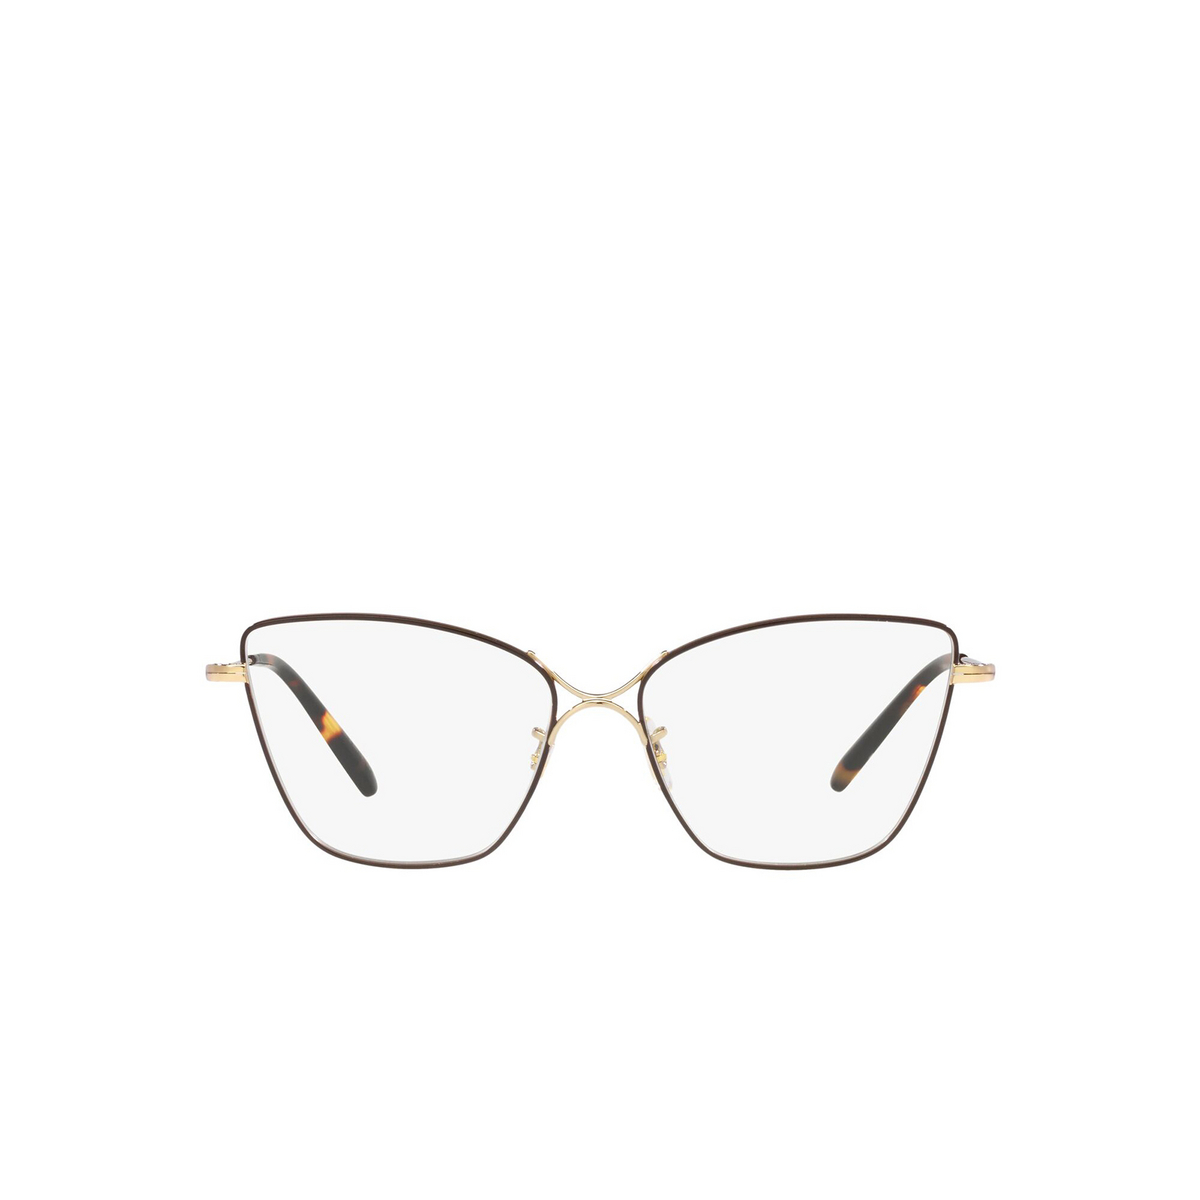 Oliver Peoples MARLYSE Sunglasses 5305SB Gold / Tortoise - front view